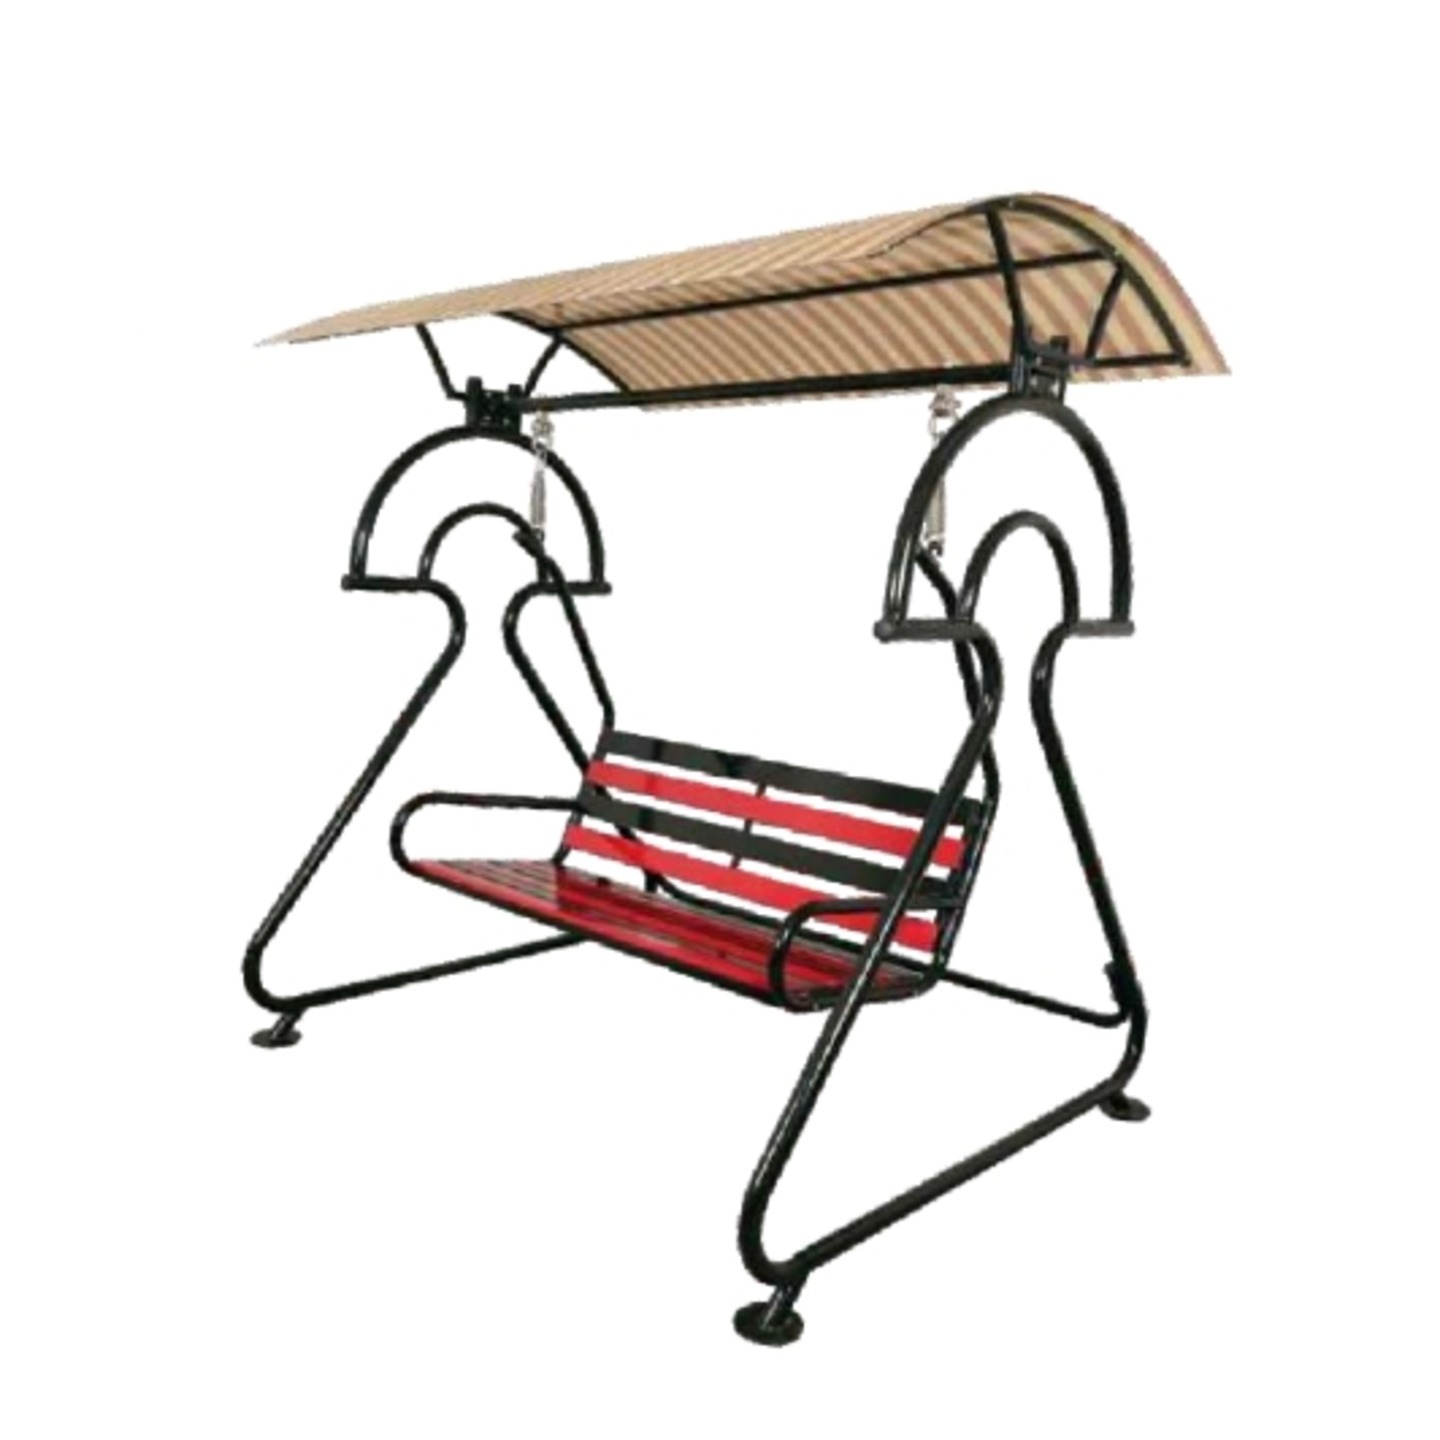 HJA Swing With Stand Roof HOJ-003 In Red & Black Colour